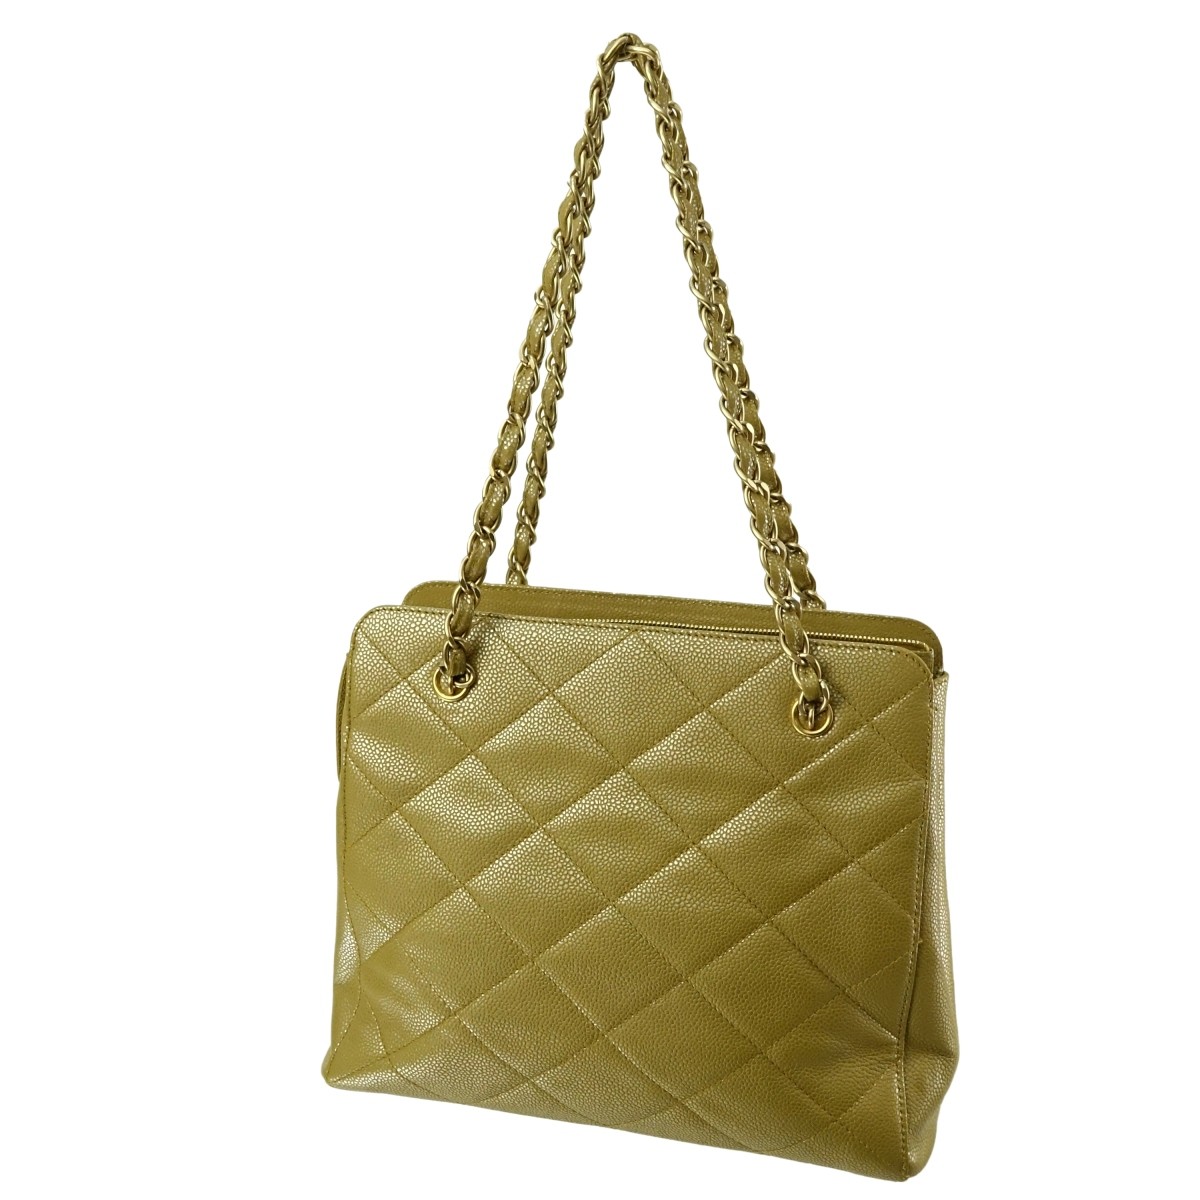 Chanel Metallic Tan Zip Top Quilted Leather Bag